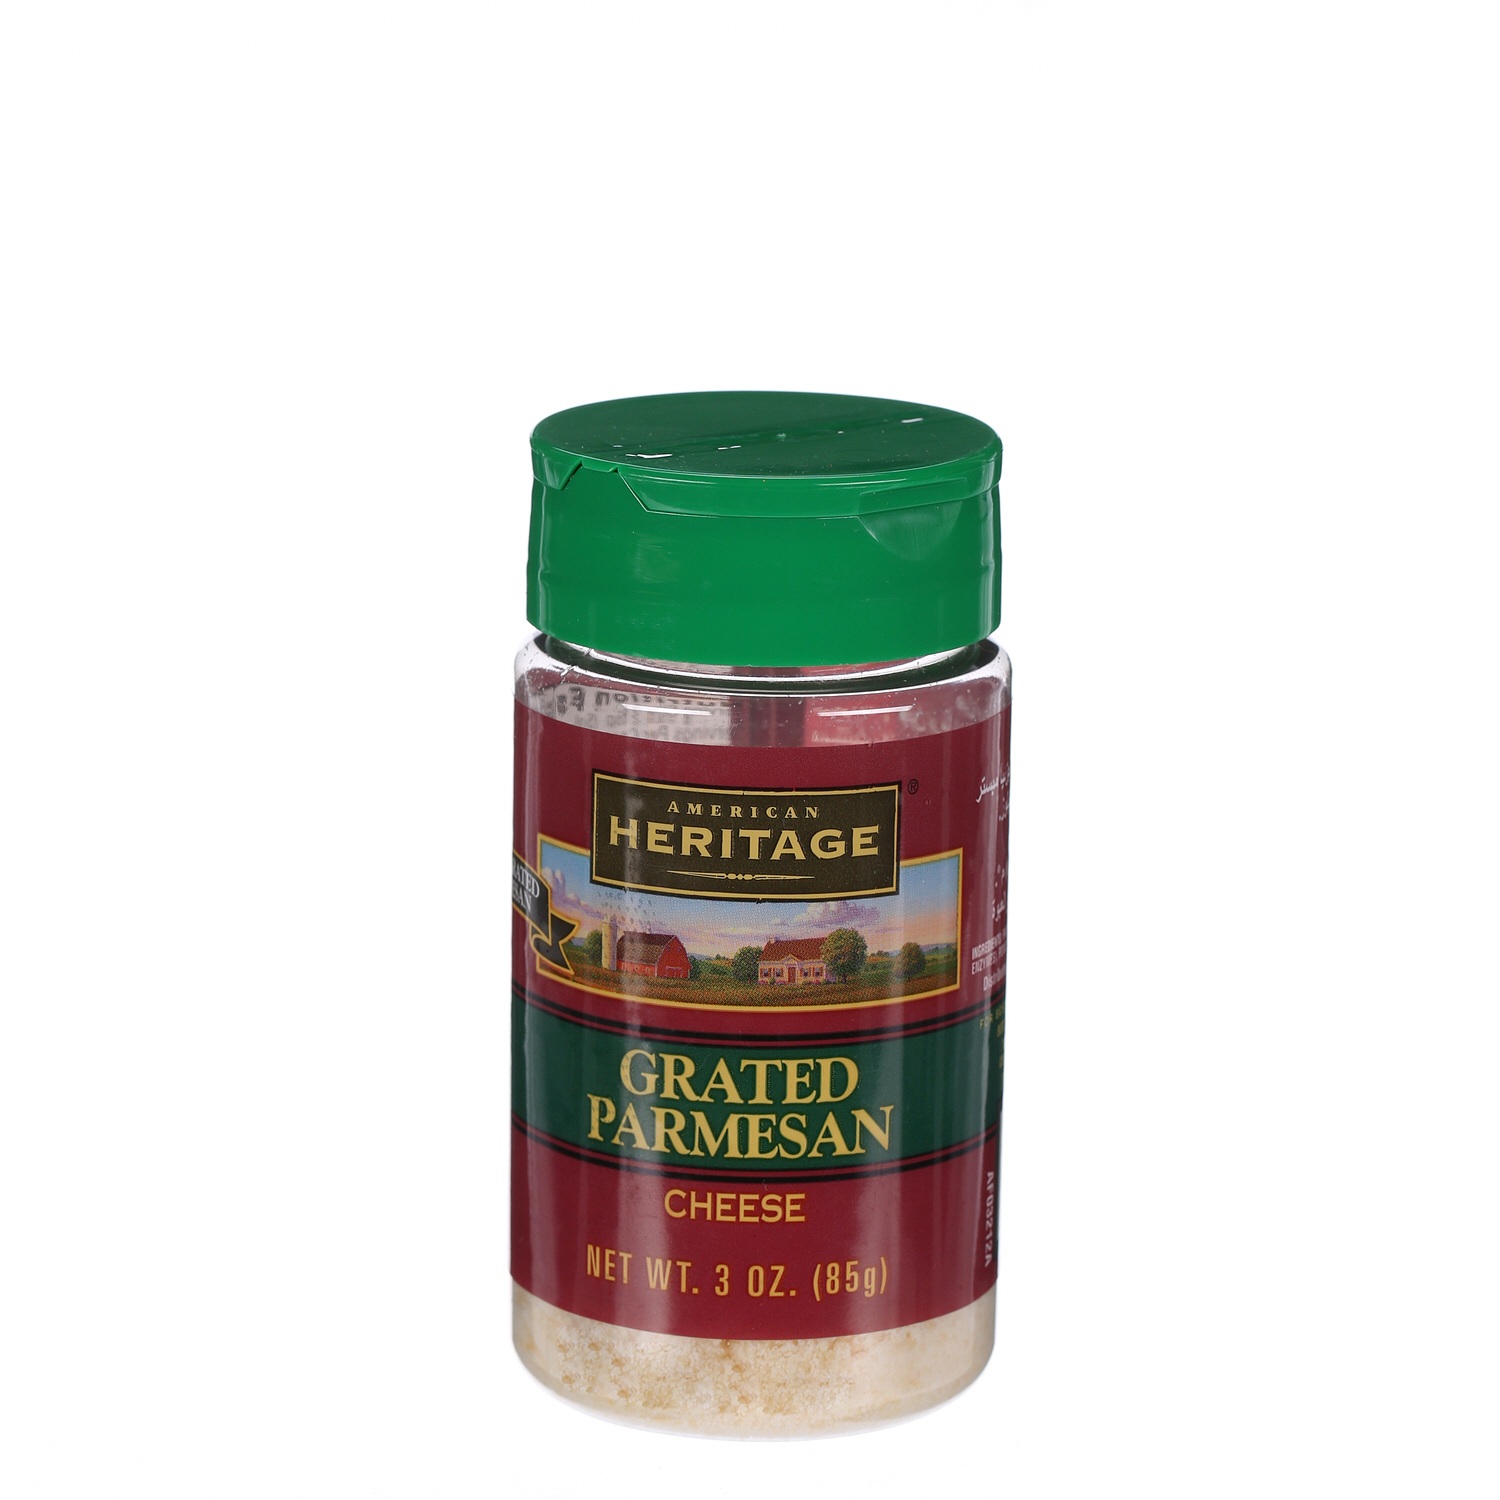 American Heritage Grated Parmesan Cheese 3 Oz